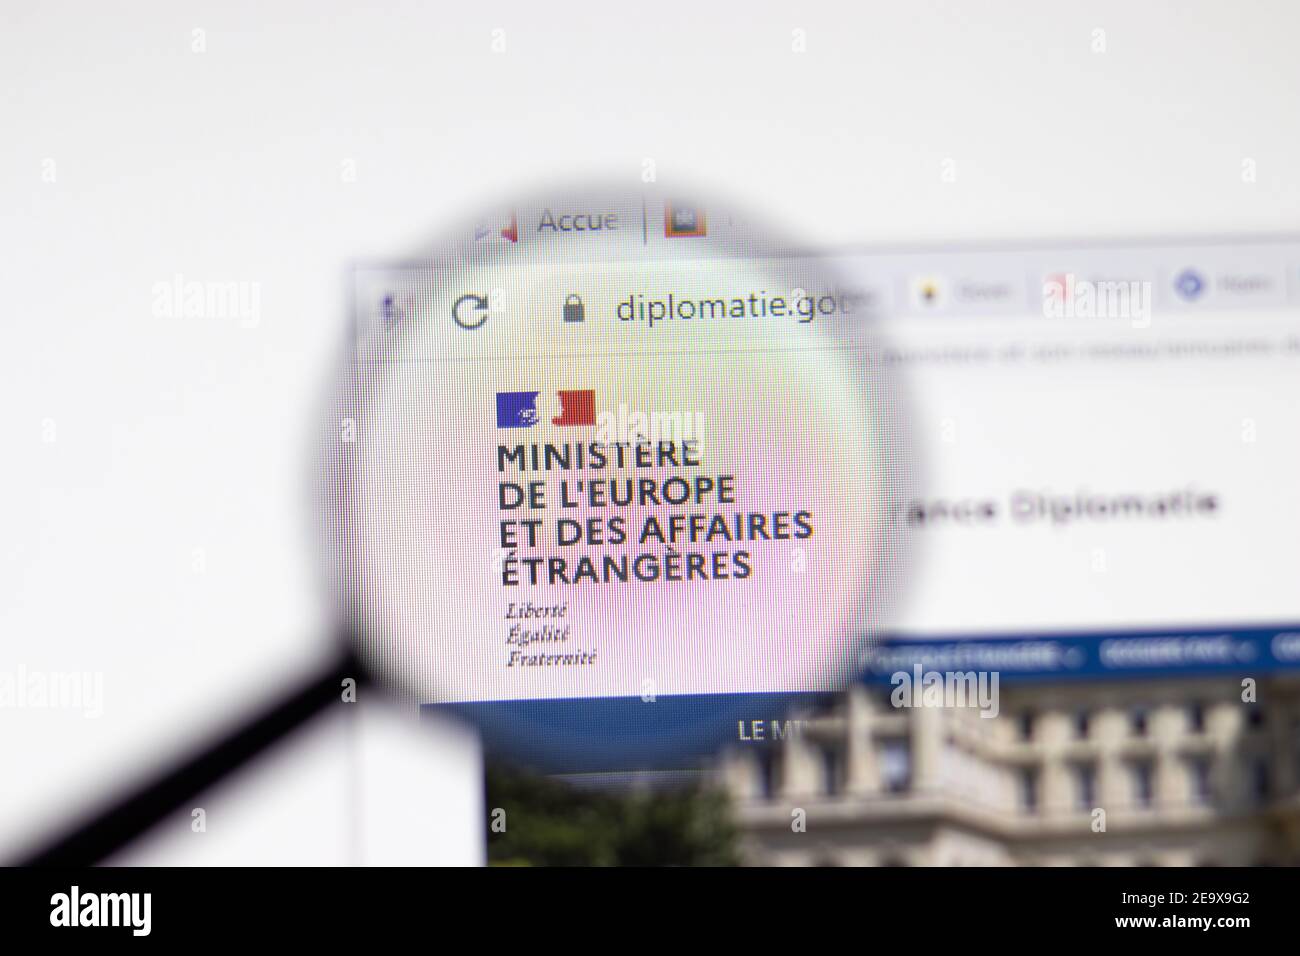 Los Angeles, USA - 1 February 2021: France Diplomacy website page. Diplomatie.gouv.fr logo on display screen, Illustrative Editorial Stock Photo